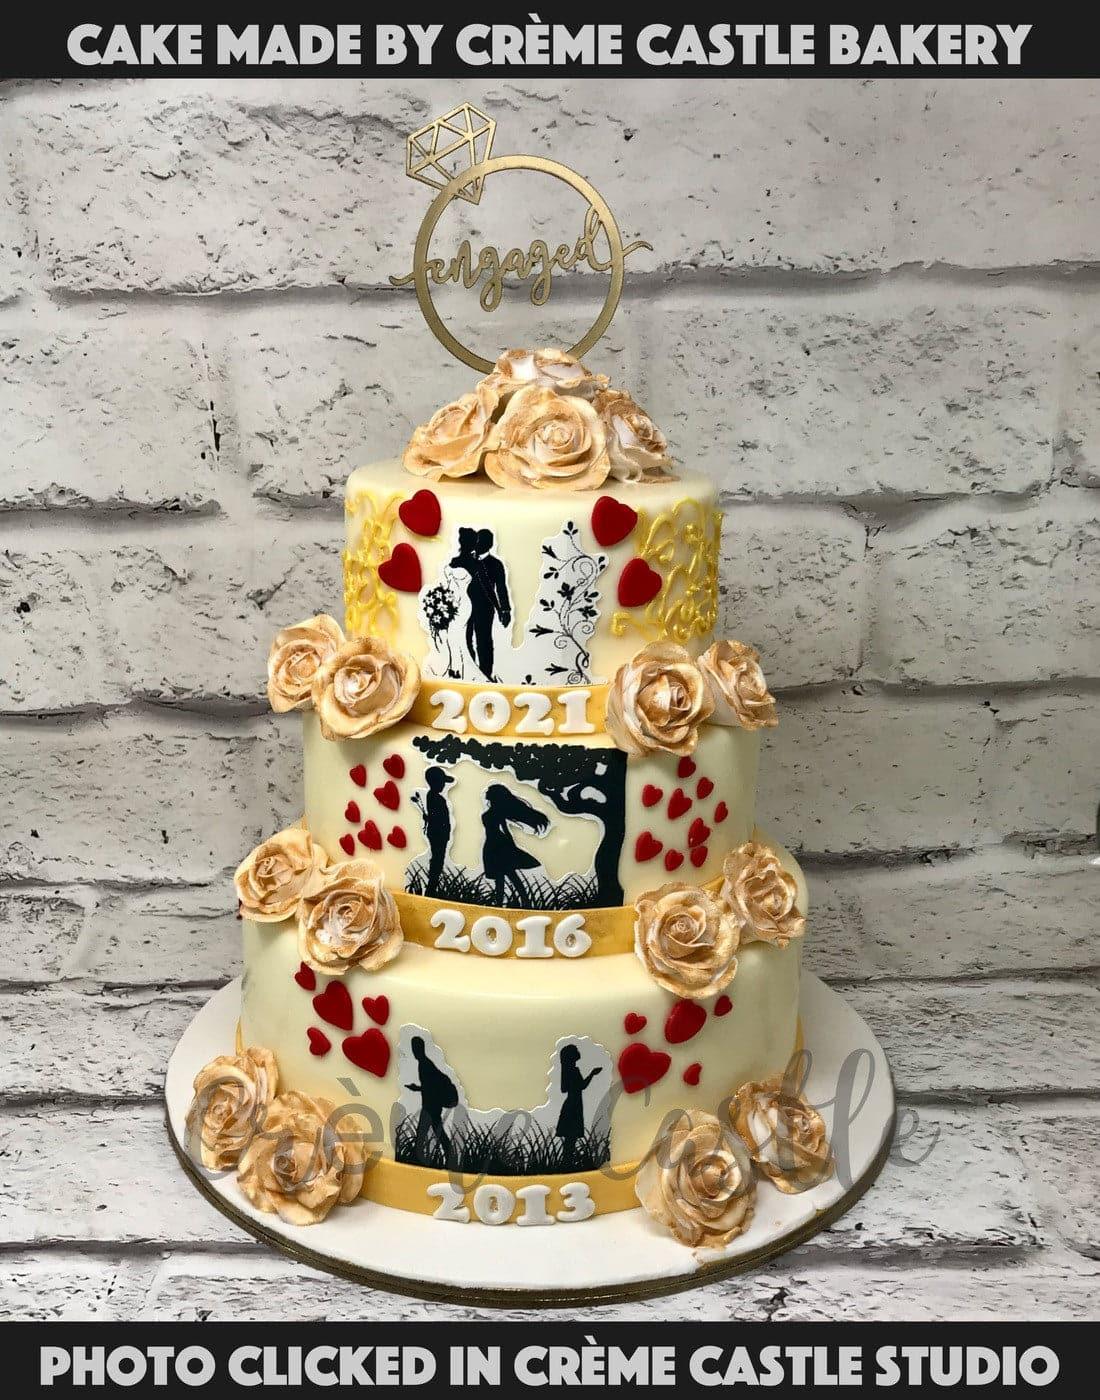 The love story Cake – Creme Castle